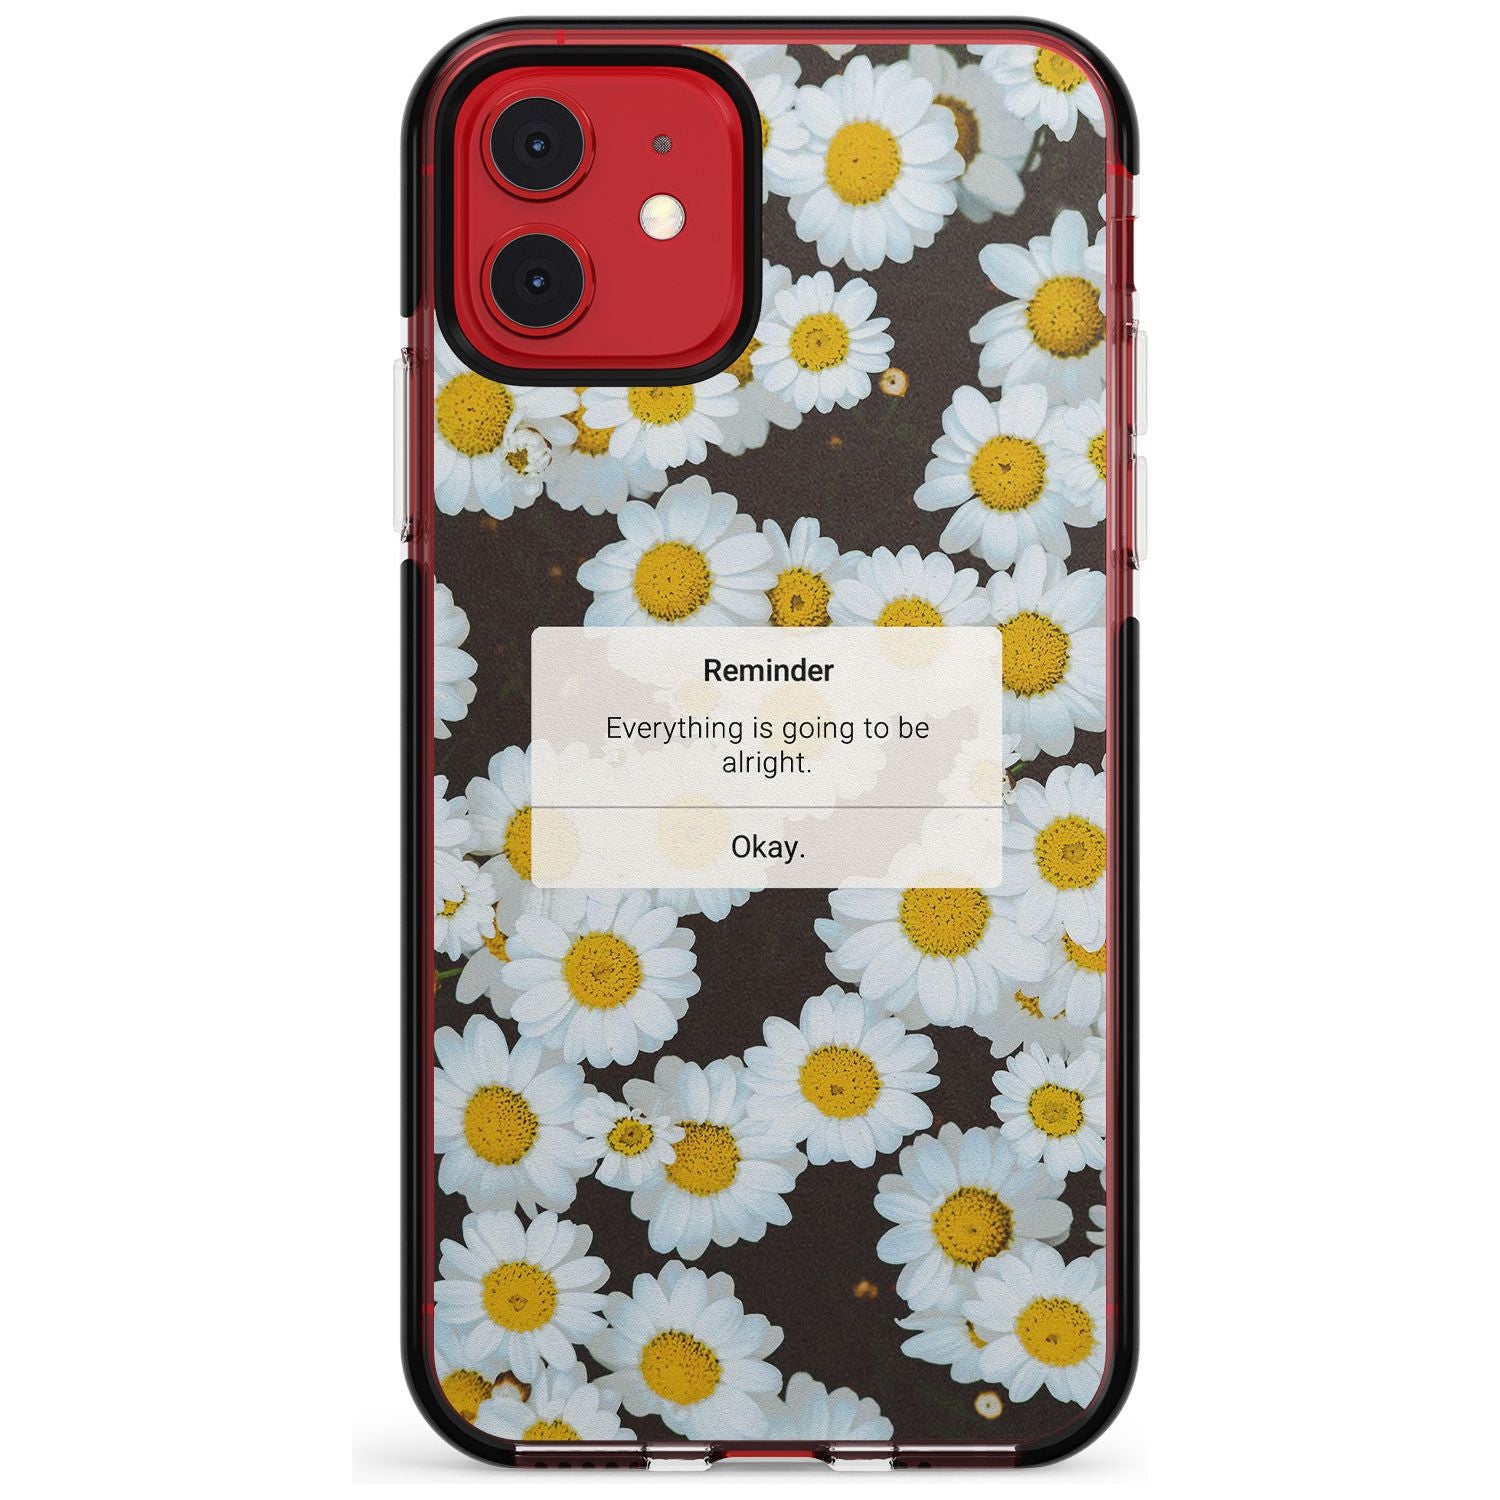 "Everything will be alright" iPhone Reminder Pink Fade Impact Phone Case for iPhone 11 Pro Max